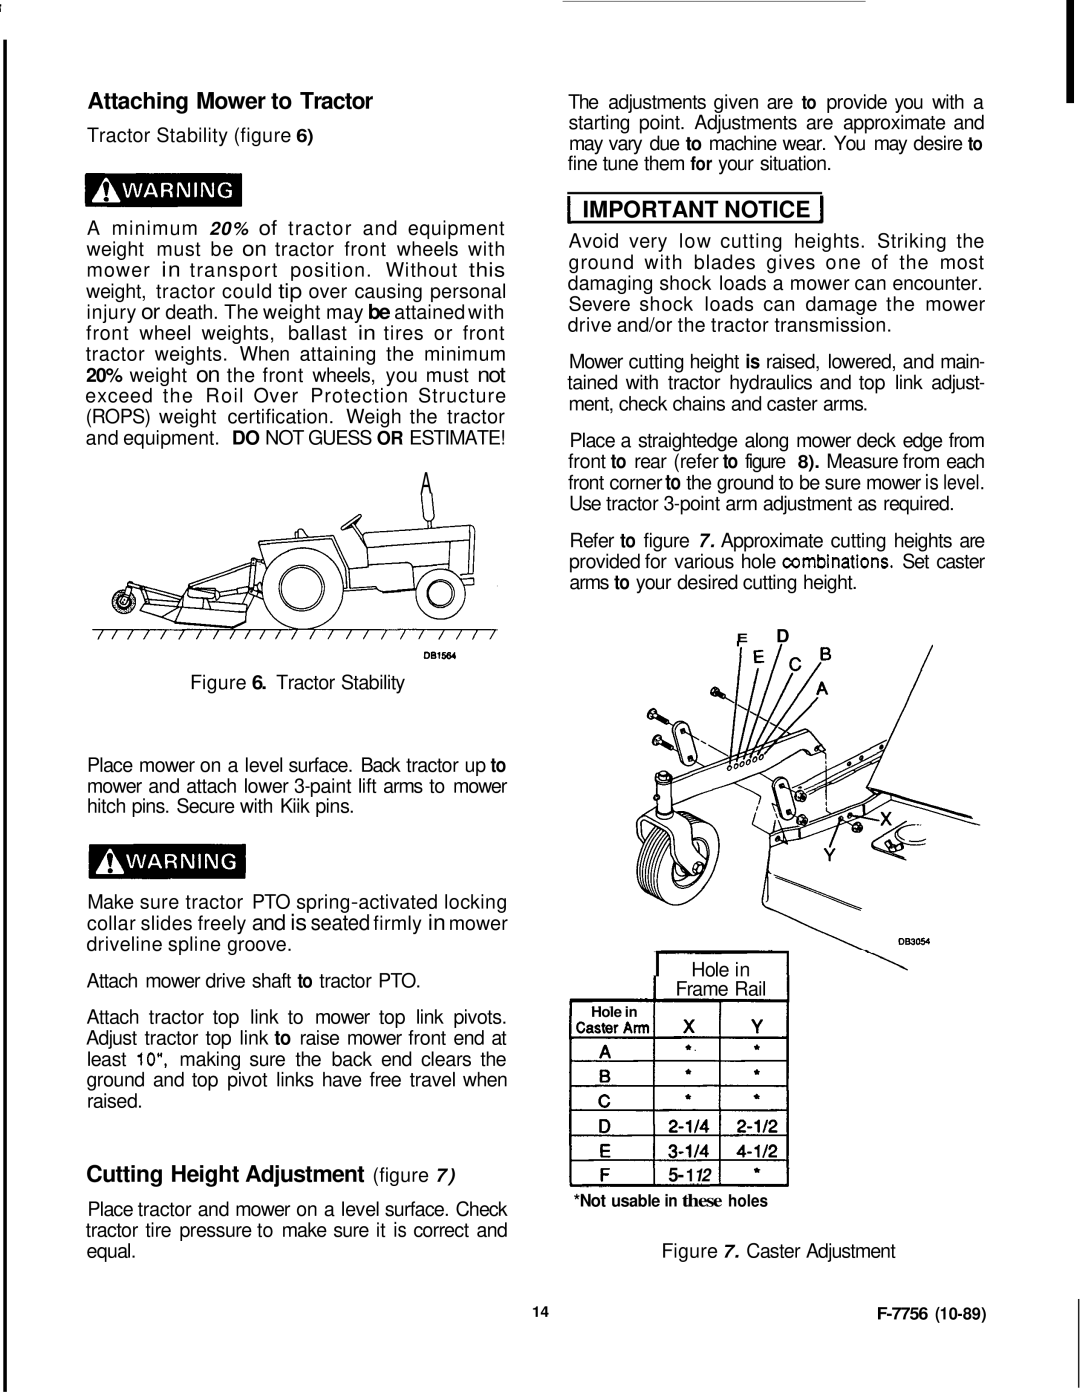 Honda Power Equipment RM752A manual Attaching Mower to Tractor, Cutting Height Adjustment figure, I Important Notice 